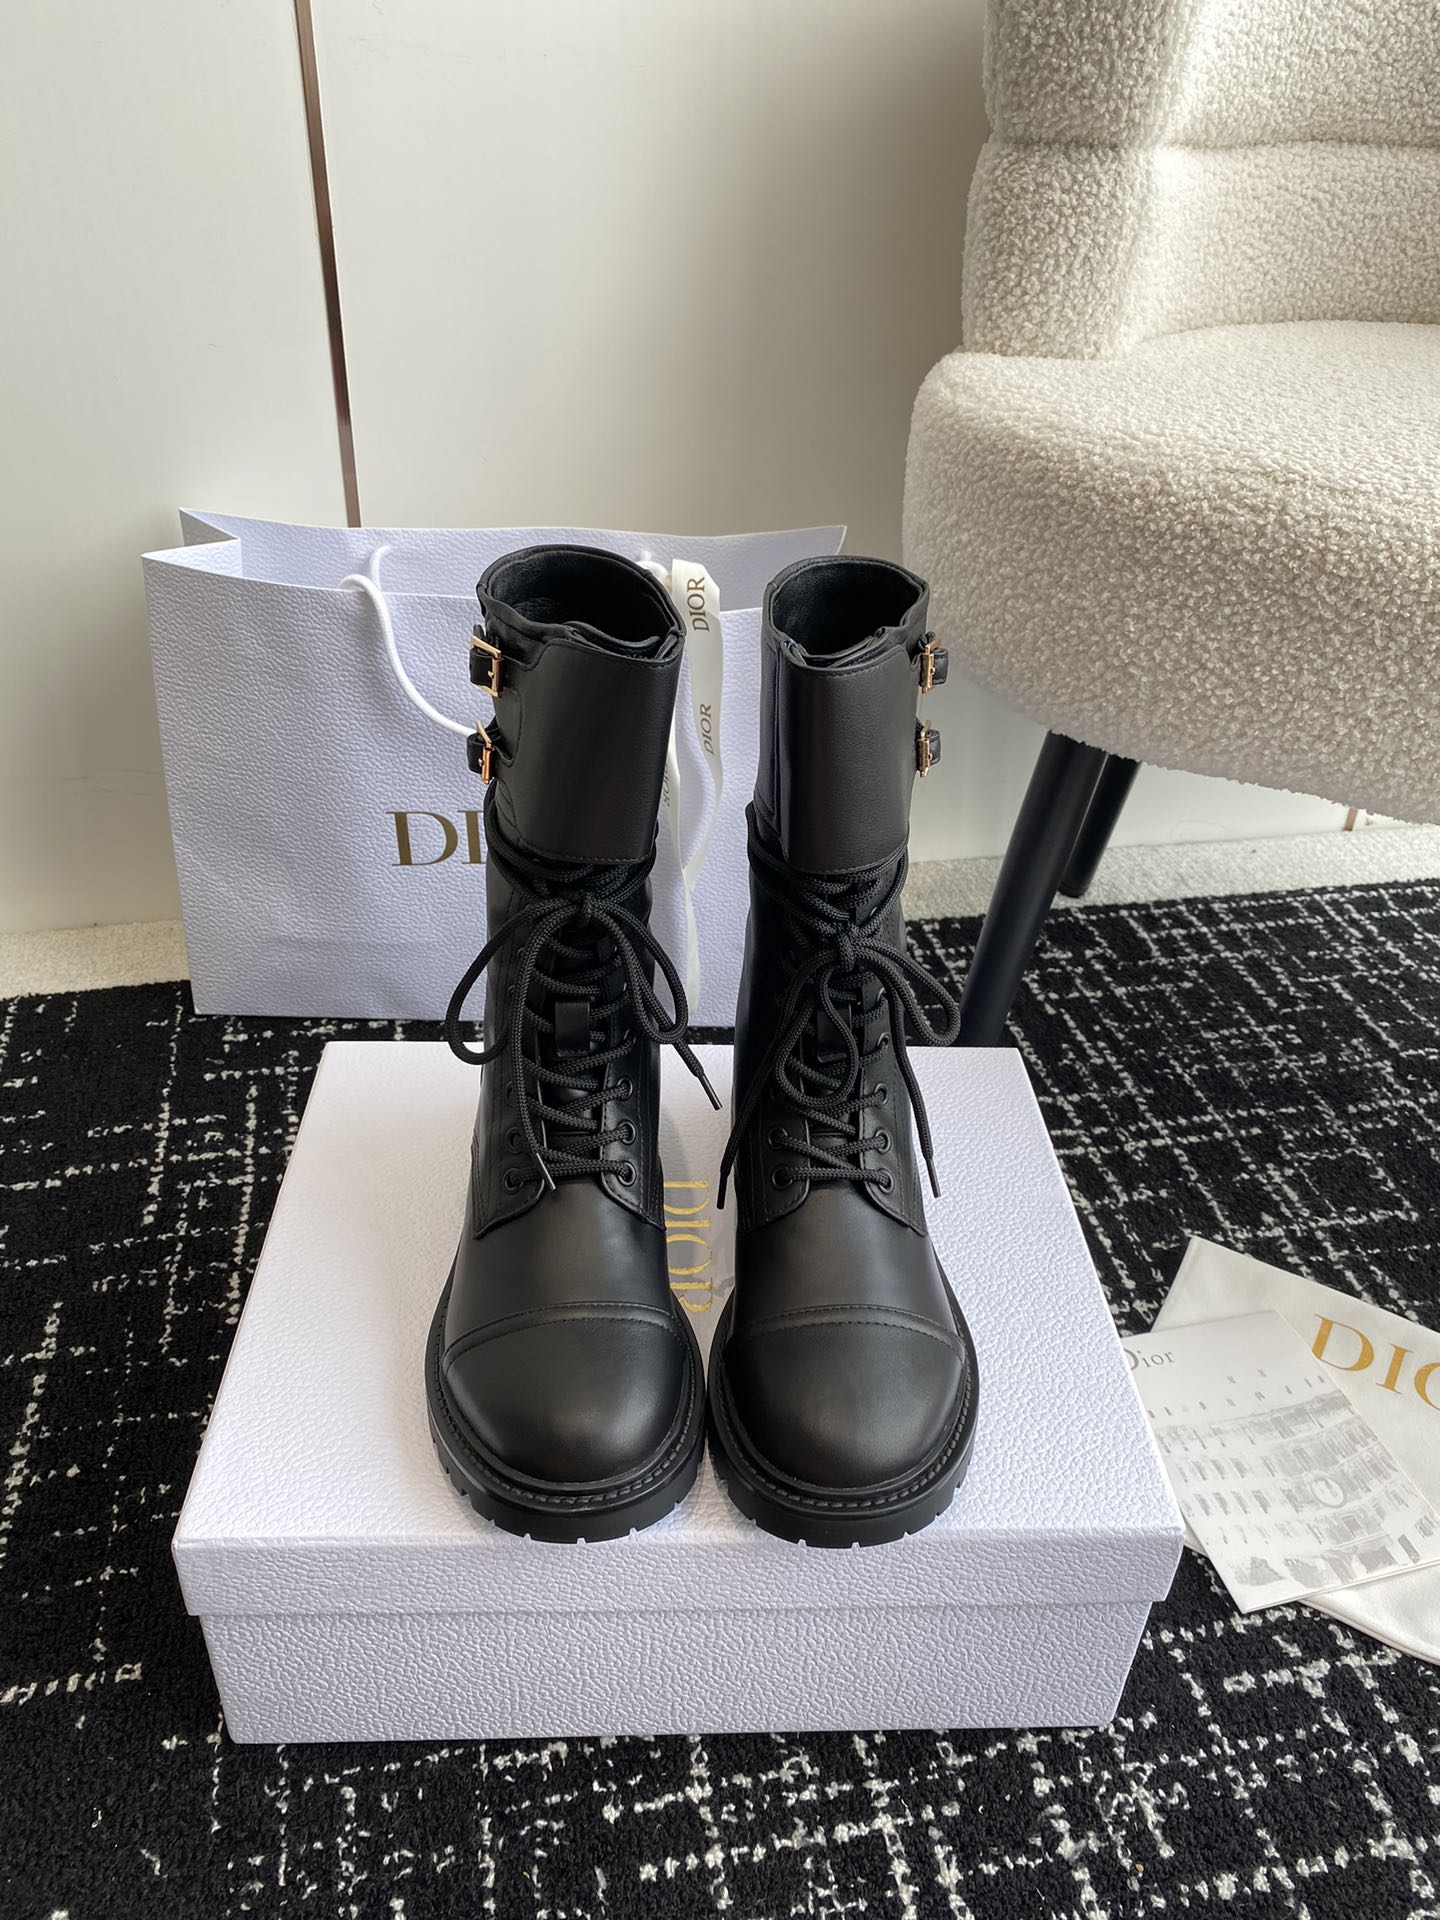 Dior Martin Boots Cowhide Rubber Sheepskin Wool Fall/Winter Collection Fashion Sweatpants